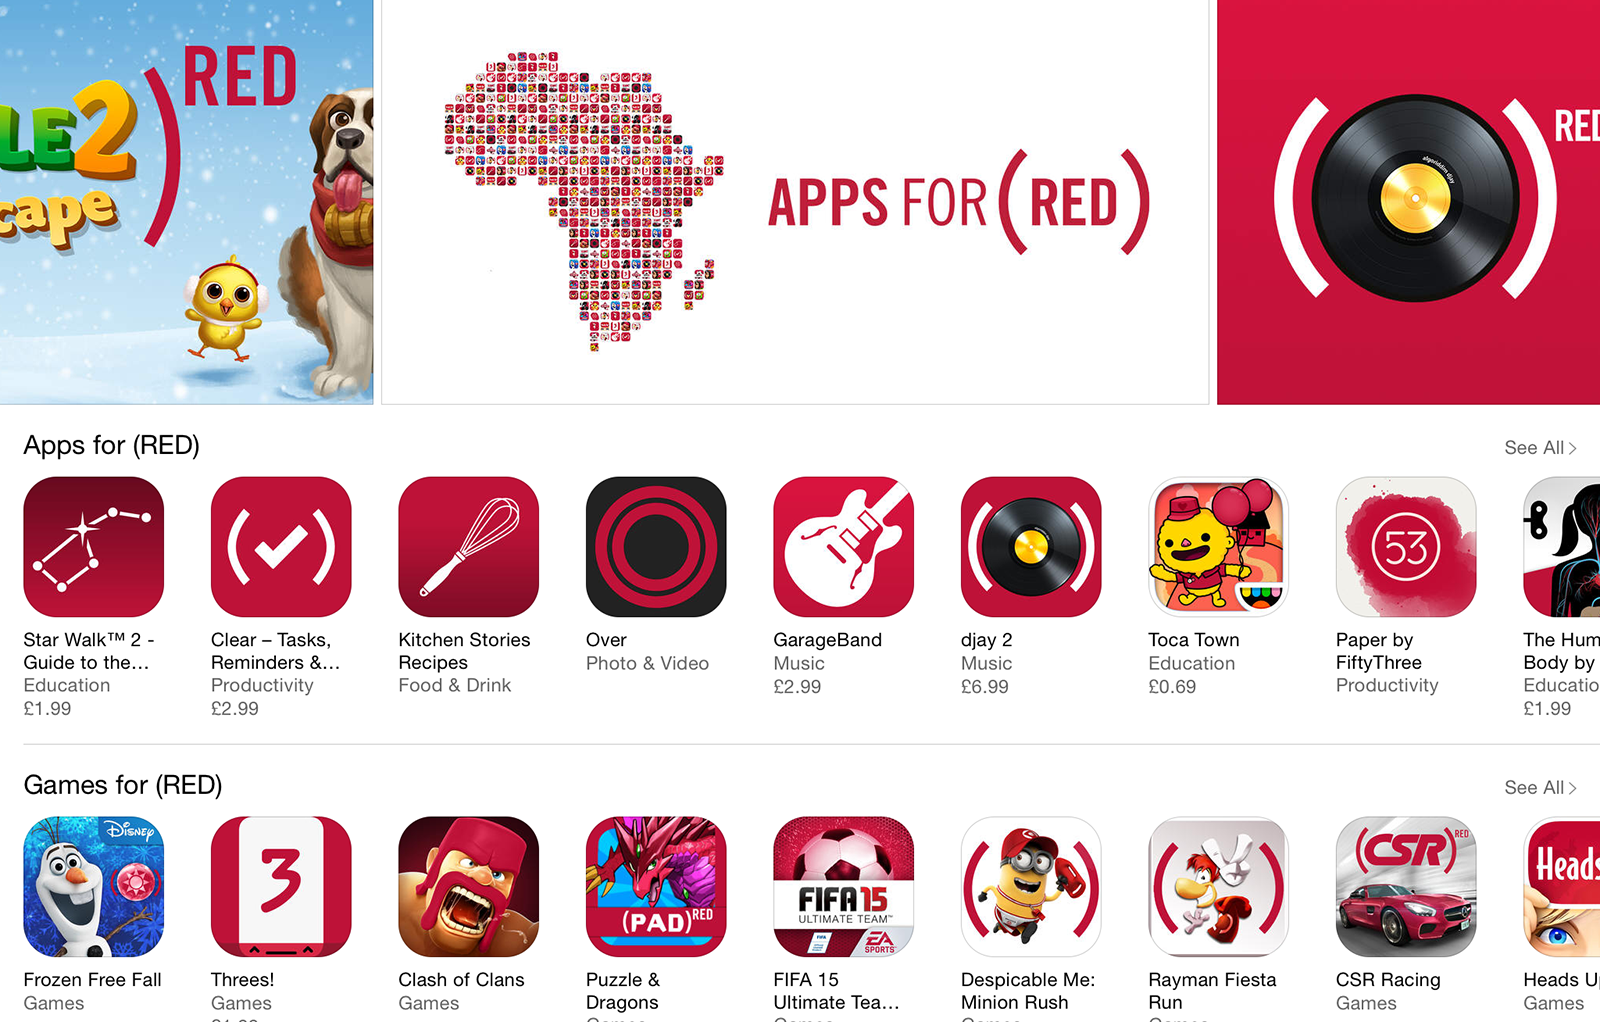 angry birds clash of clans and monument valley just a few of the ios apps adding content for world aids day image 1